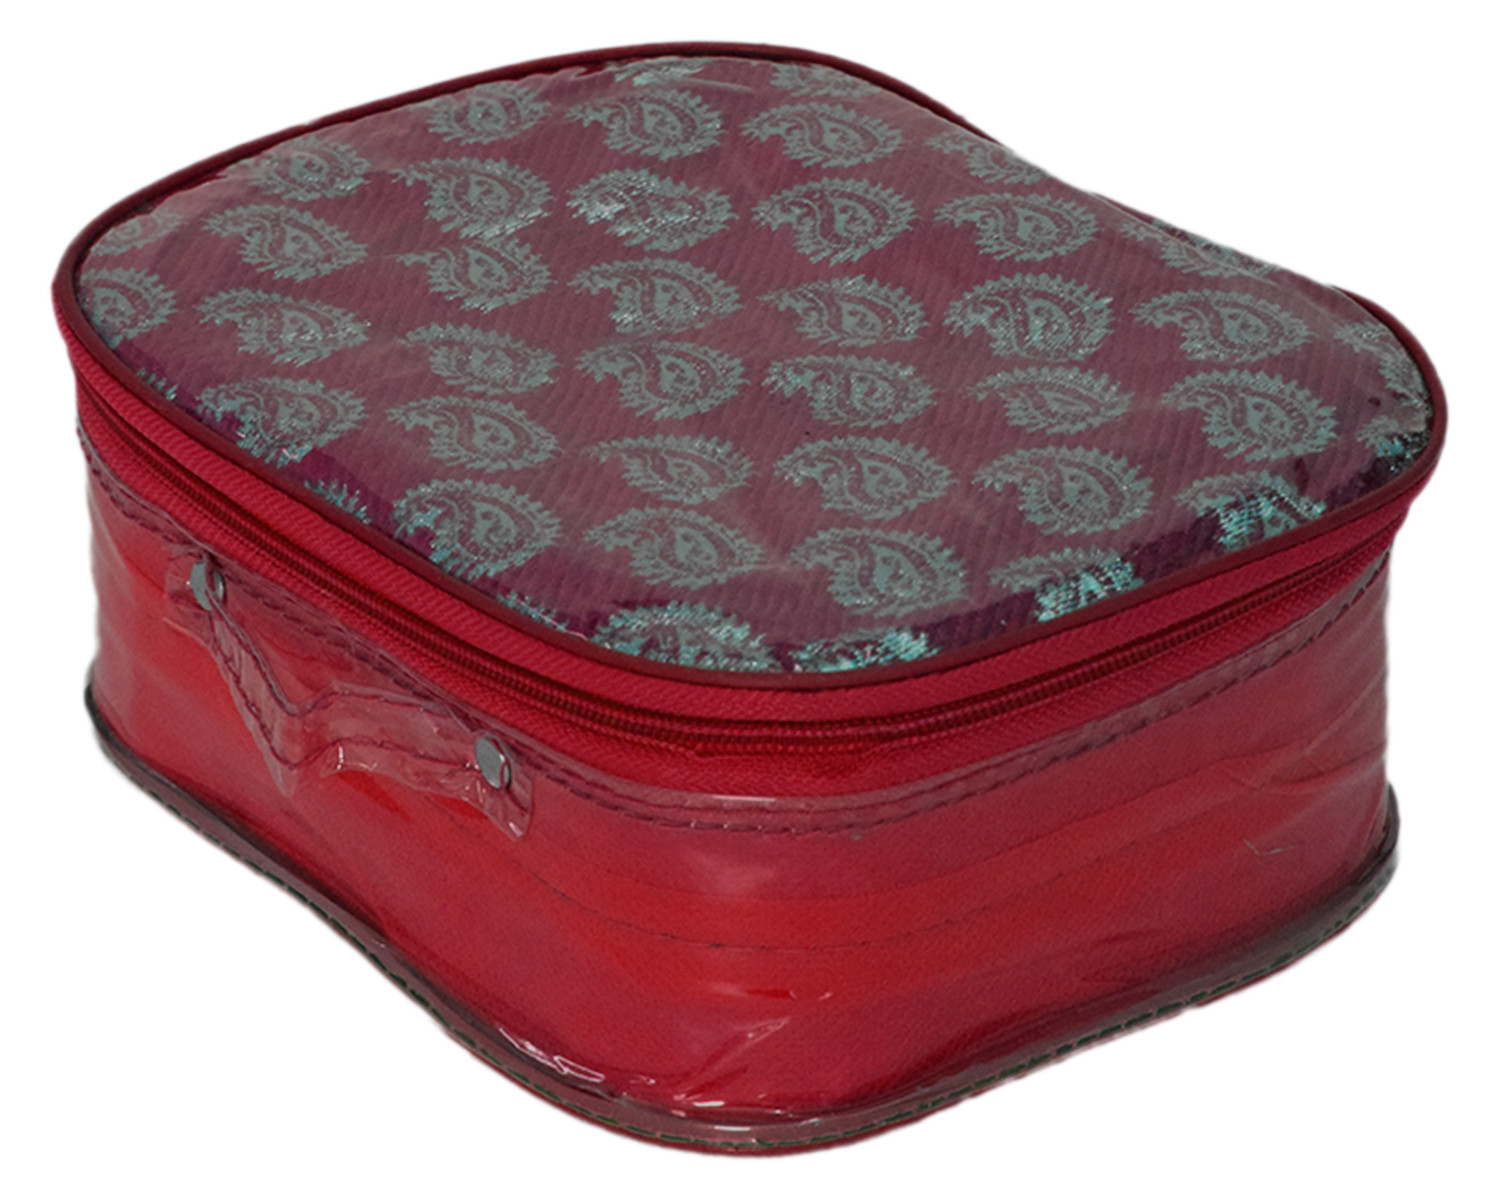 Kuber Industries Carry Printed Multiuses Laminated PVC Makeup/Jewellery/Cosmetic Organizer Bag, Travel Toiletry Pouch With Tranasparent Top, Set of 3 (Maroon)